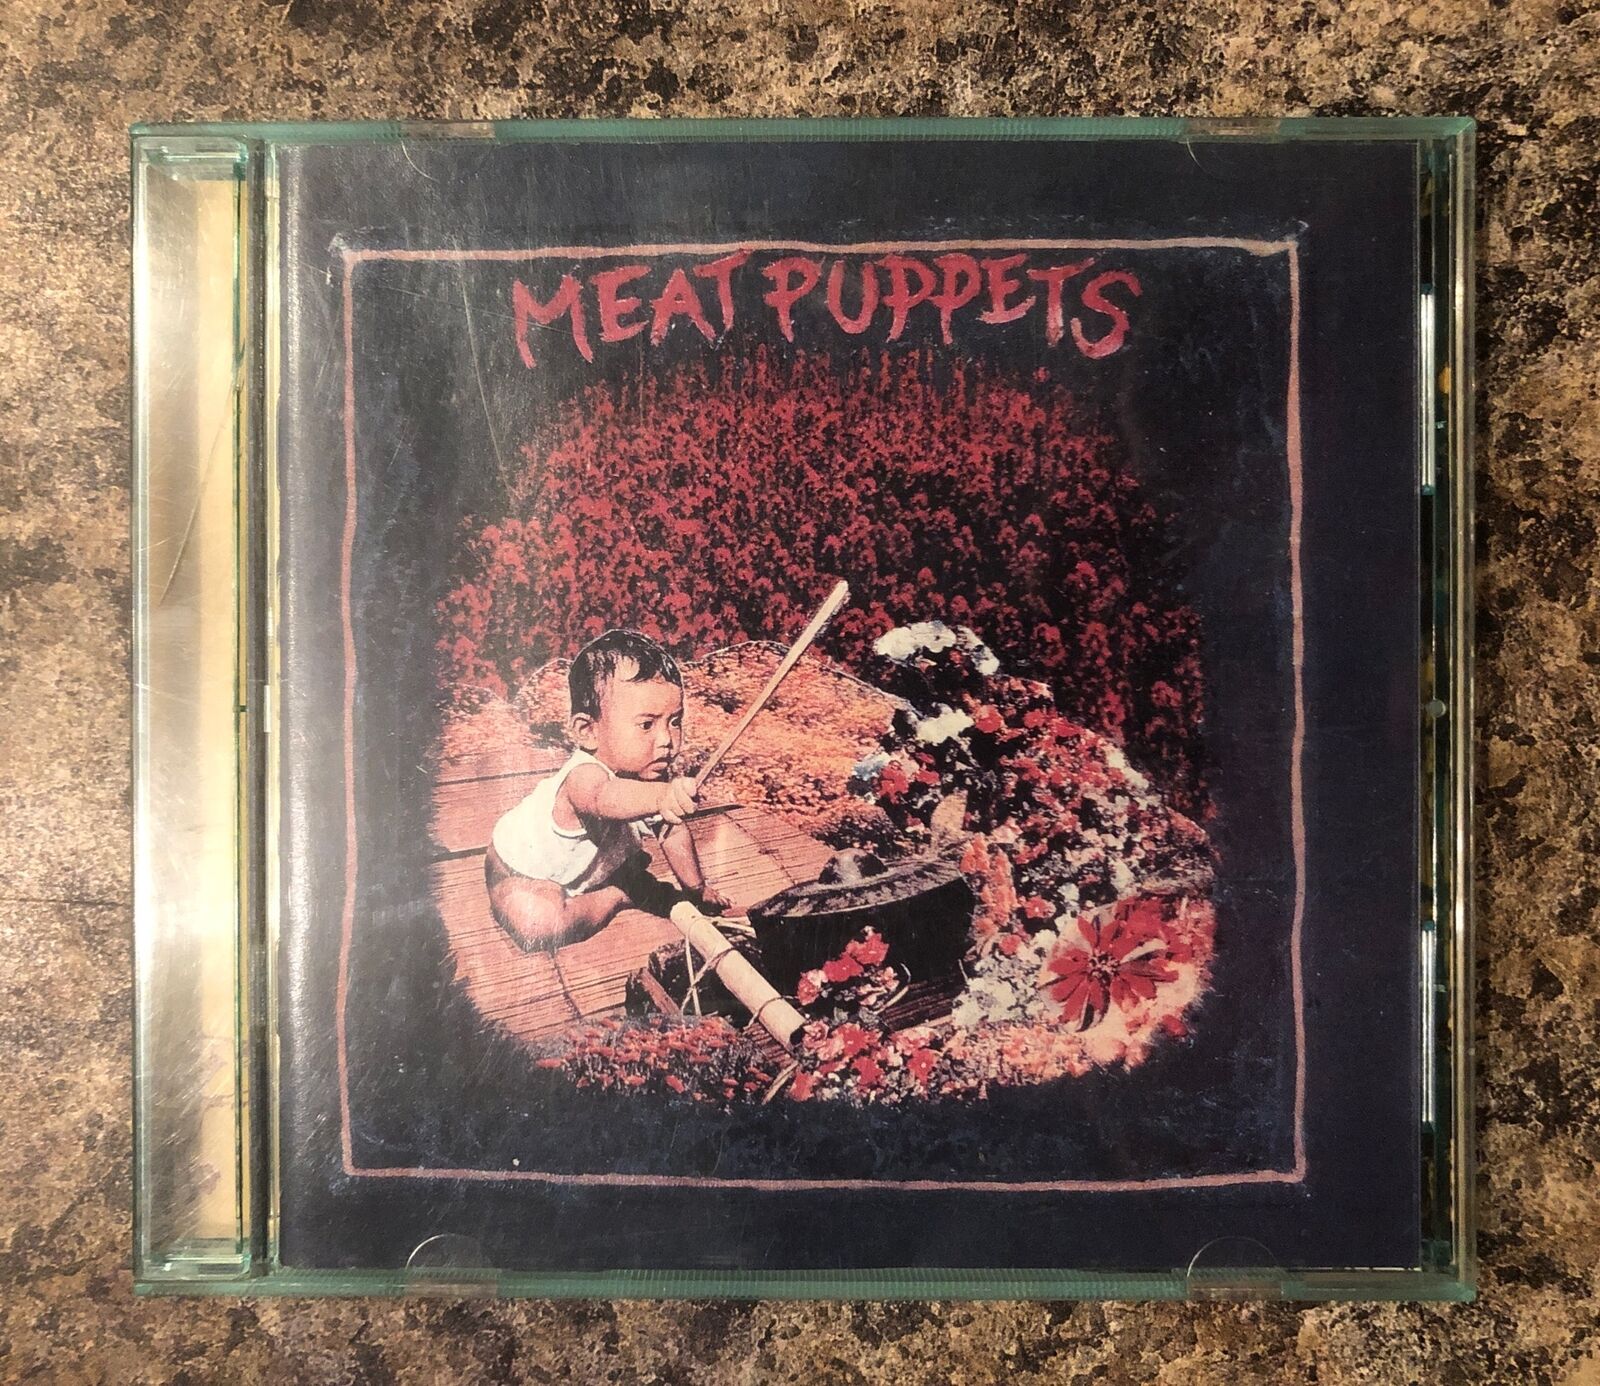 "Meat Puppets" - S/T 1982 Meat Puppets (Ryko, 1999, CD) Reissue